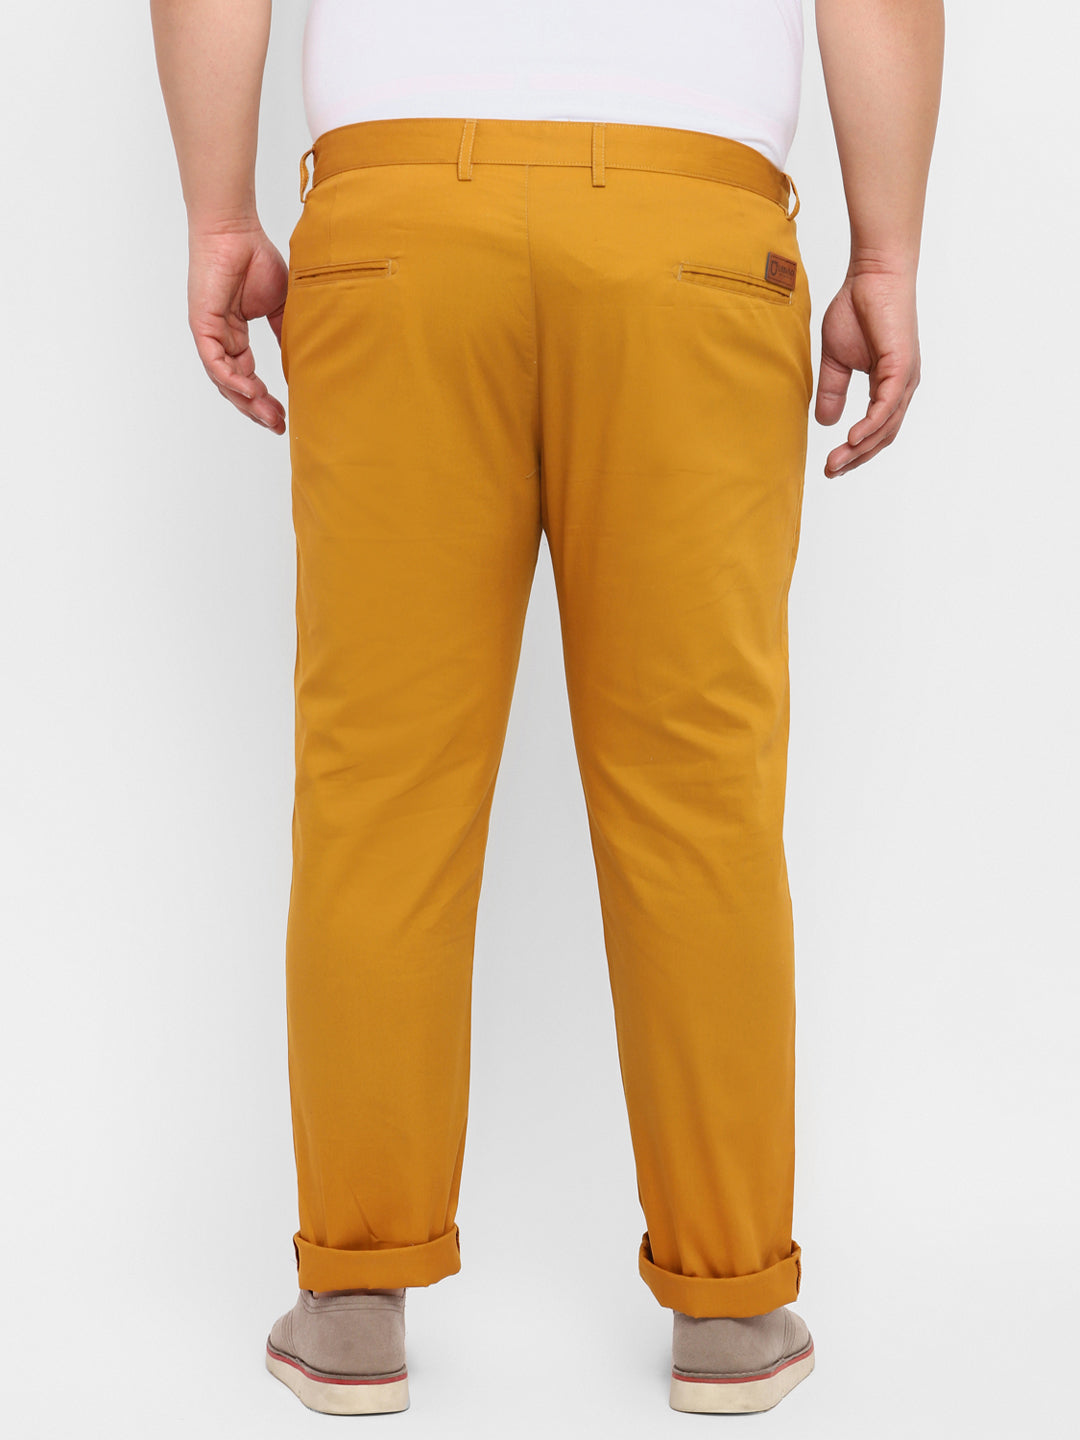 Urbano Plus Men's Yellow Cotton Light Weight Non-Stretch Regular Fit Casual Trousers